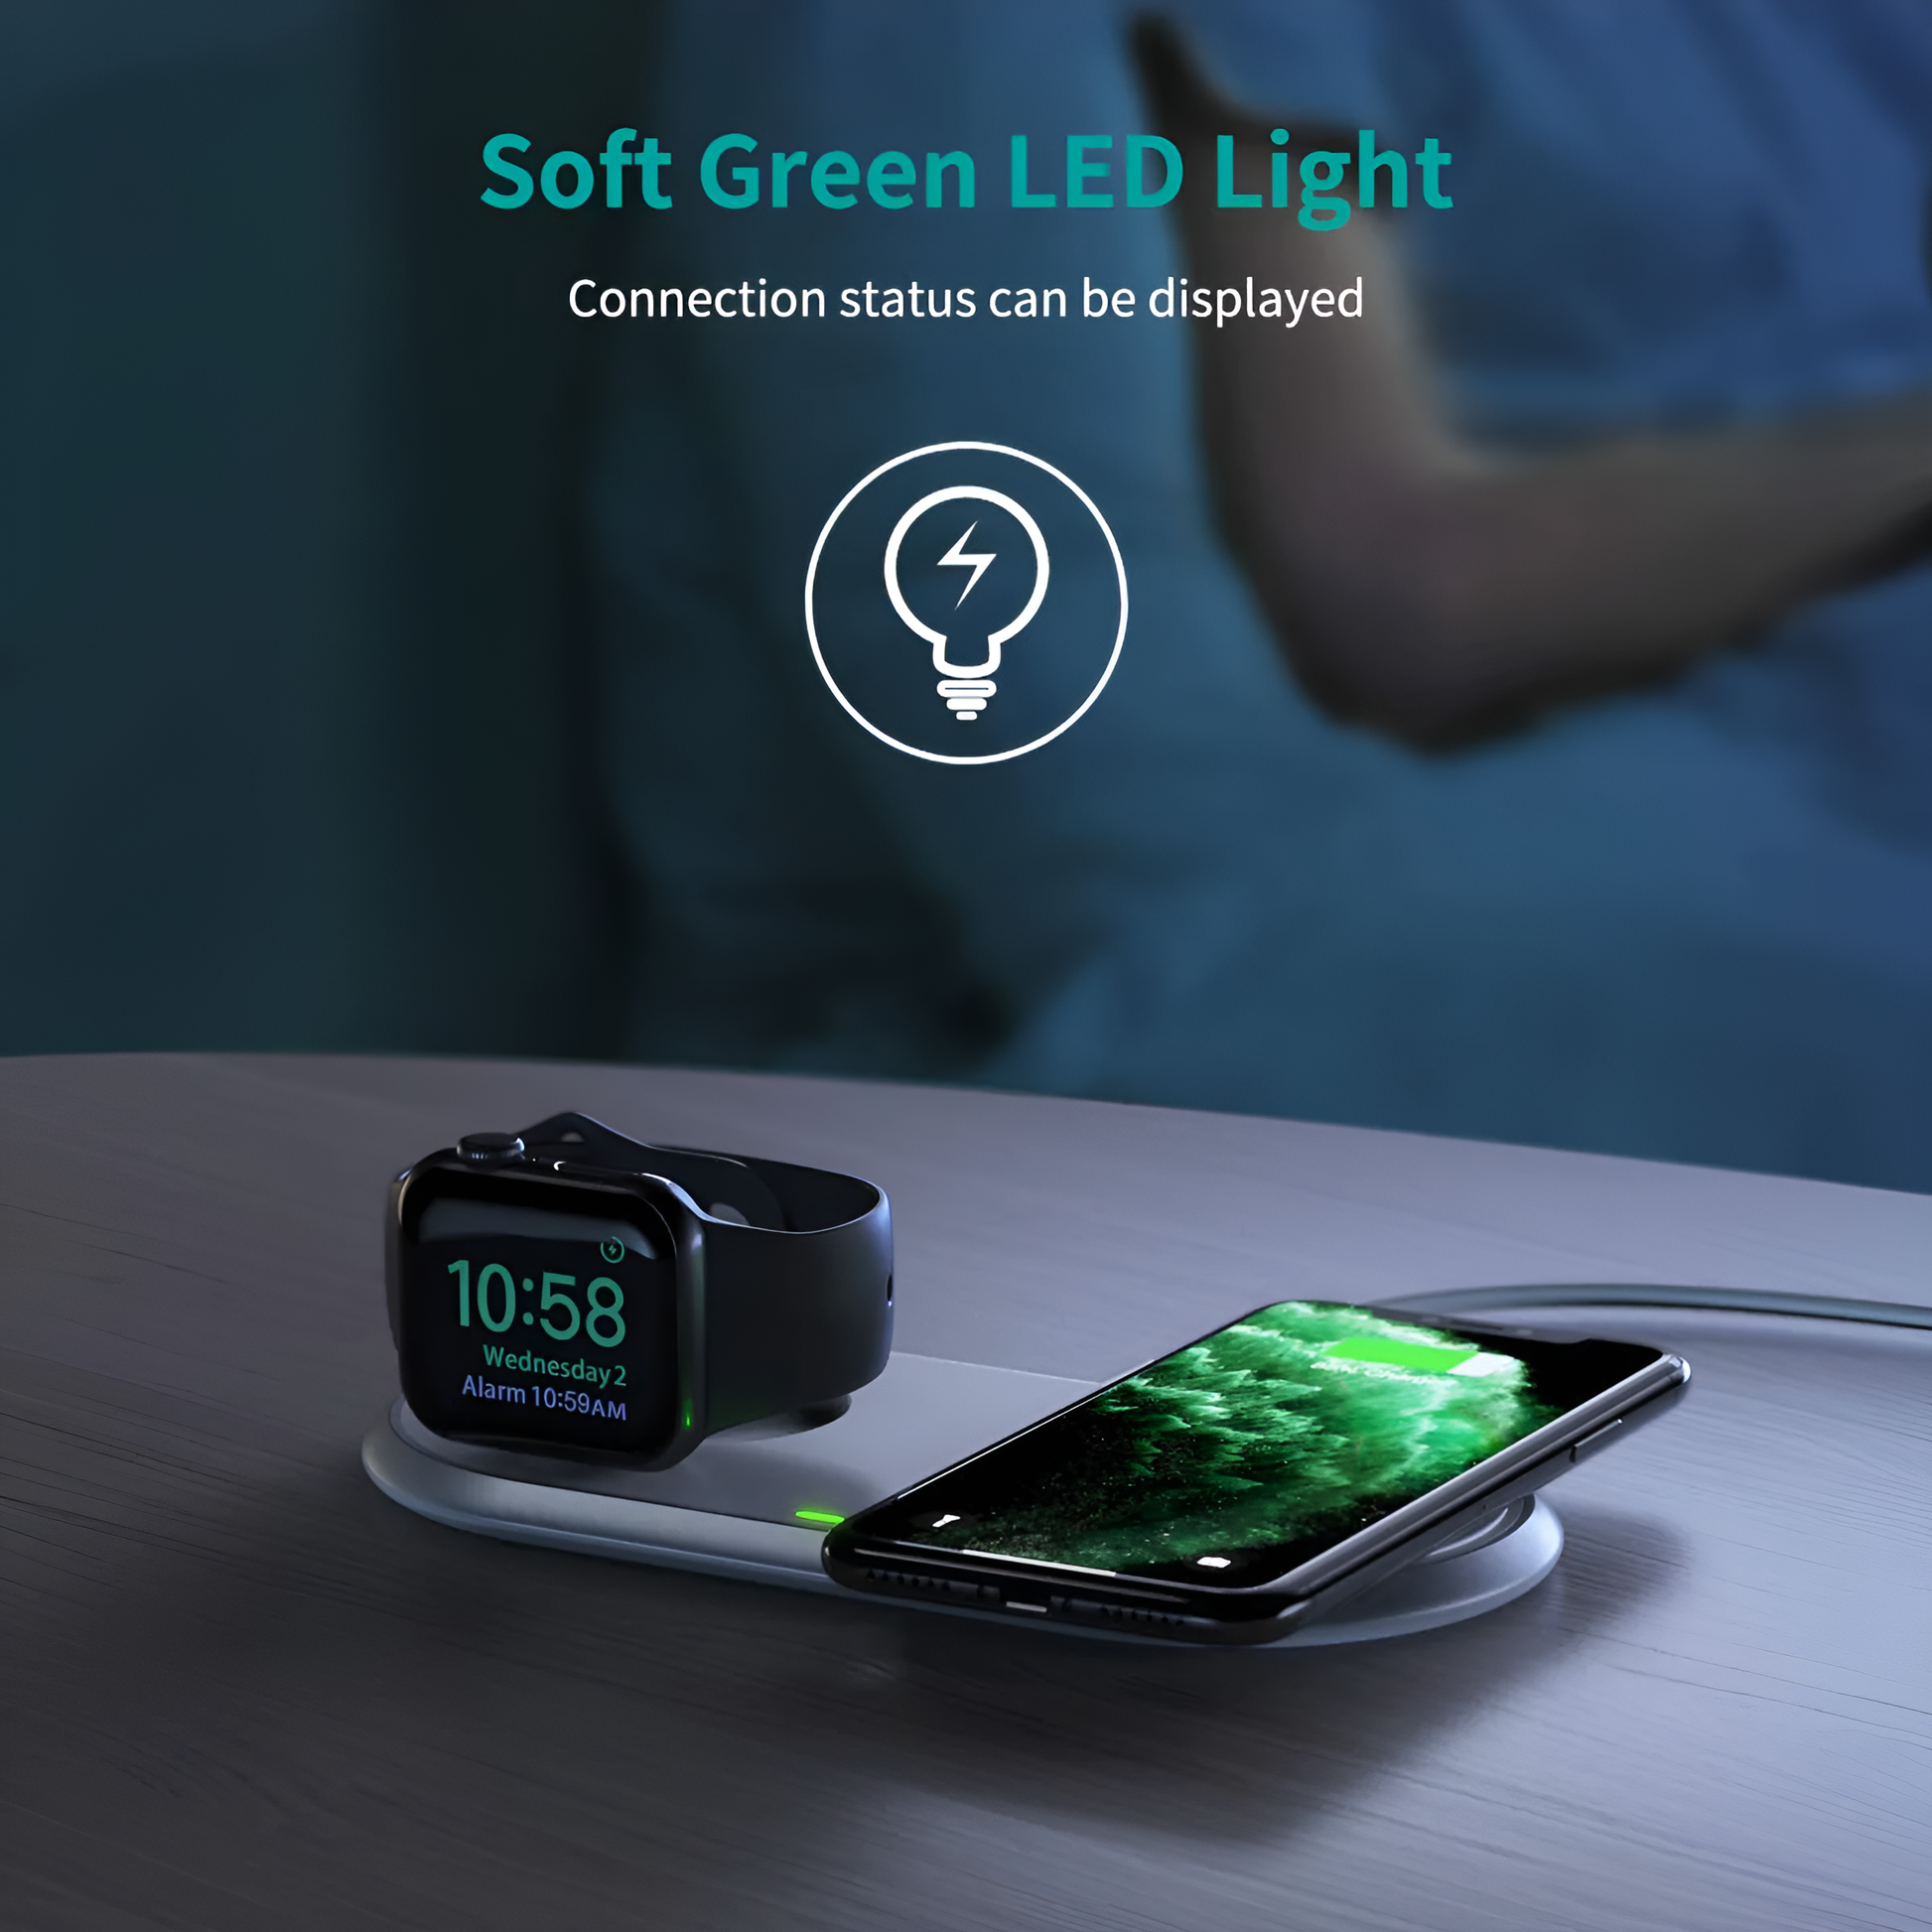 Choetech 2-in-1 15W Dual Wireless Charger For Iphone and Apple Watch (MFI Certified), T317 by jcbl accessories.Soft Green LED Light | Connection status can be displayed |